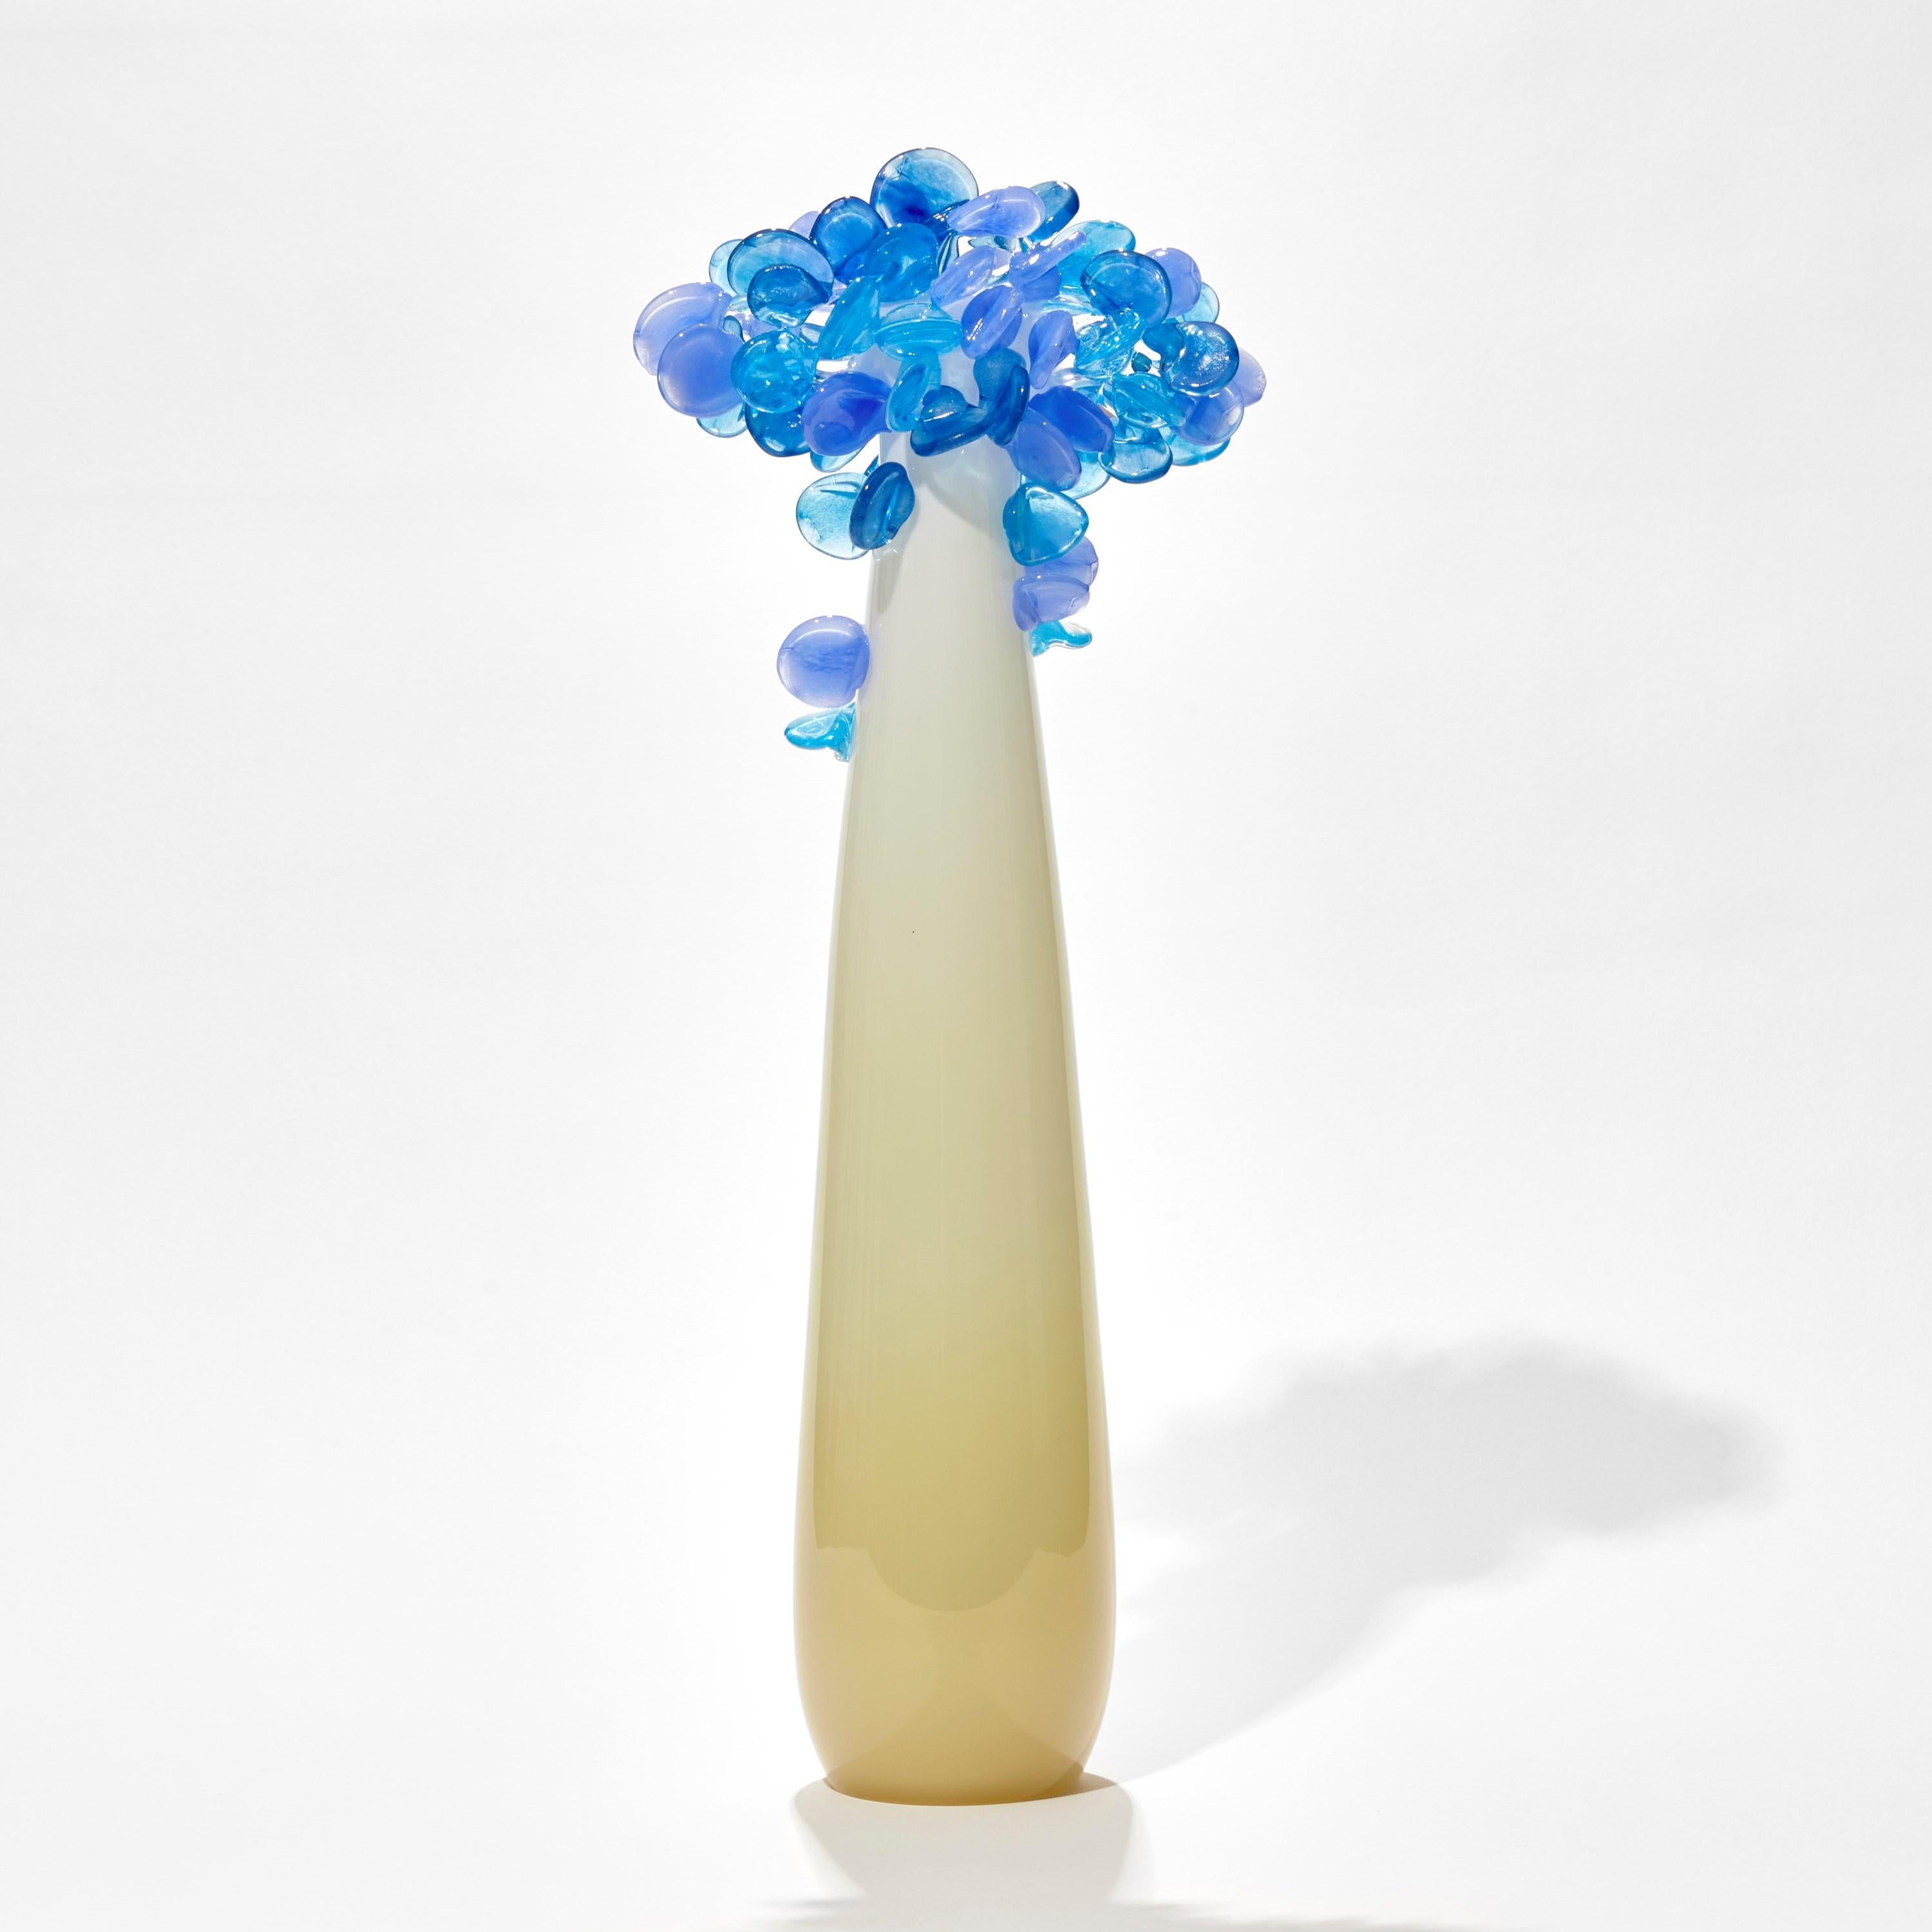 'Enchanted Dawn in Blues I' is a unique glass tree sculpture by the British artist, Louis Thompson.

With both his Enchanted Dawn and Dusk collections, Thompson brings a joyous and playful element to his glass. Gracious sweeping trunks are topped